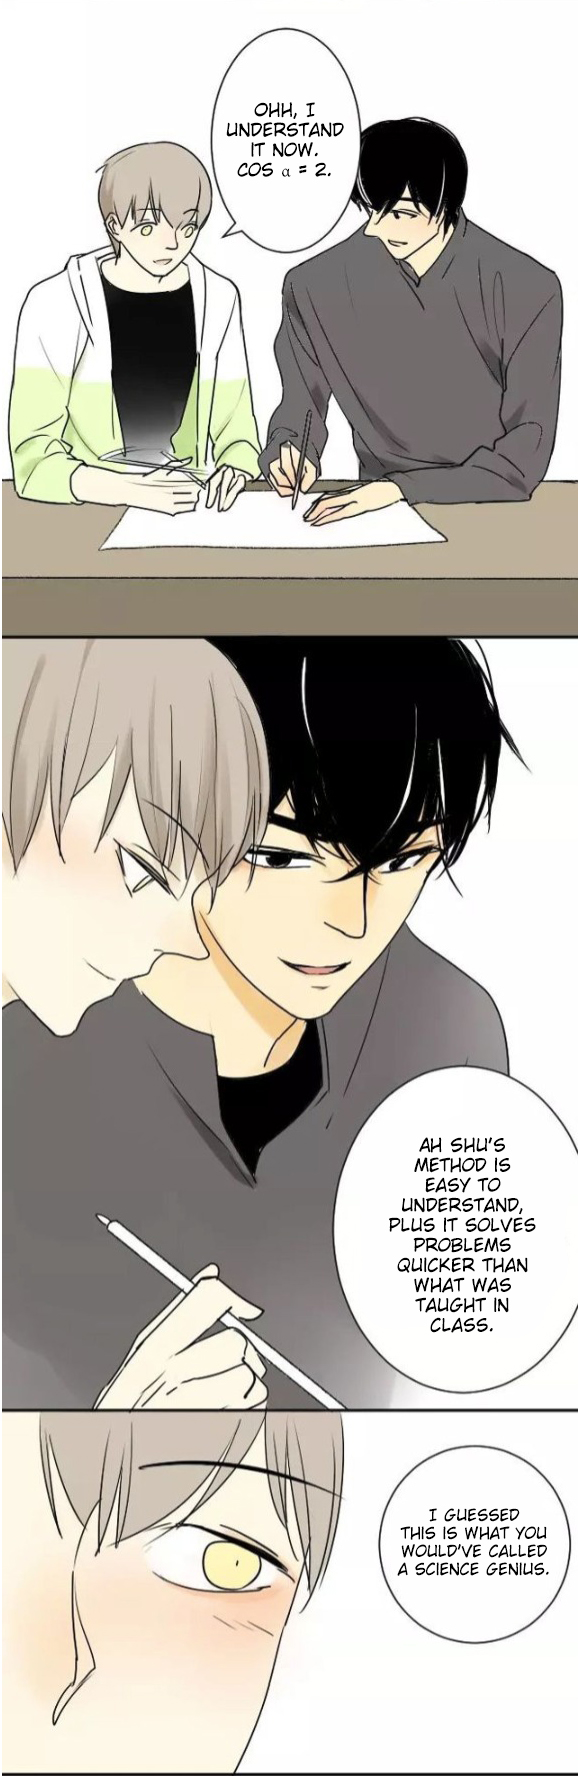 Classmate Relationship? Ch. 10 Ah Shu is this good at maths?!